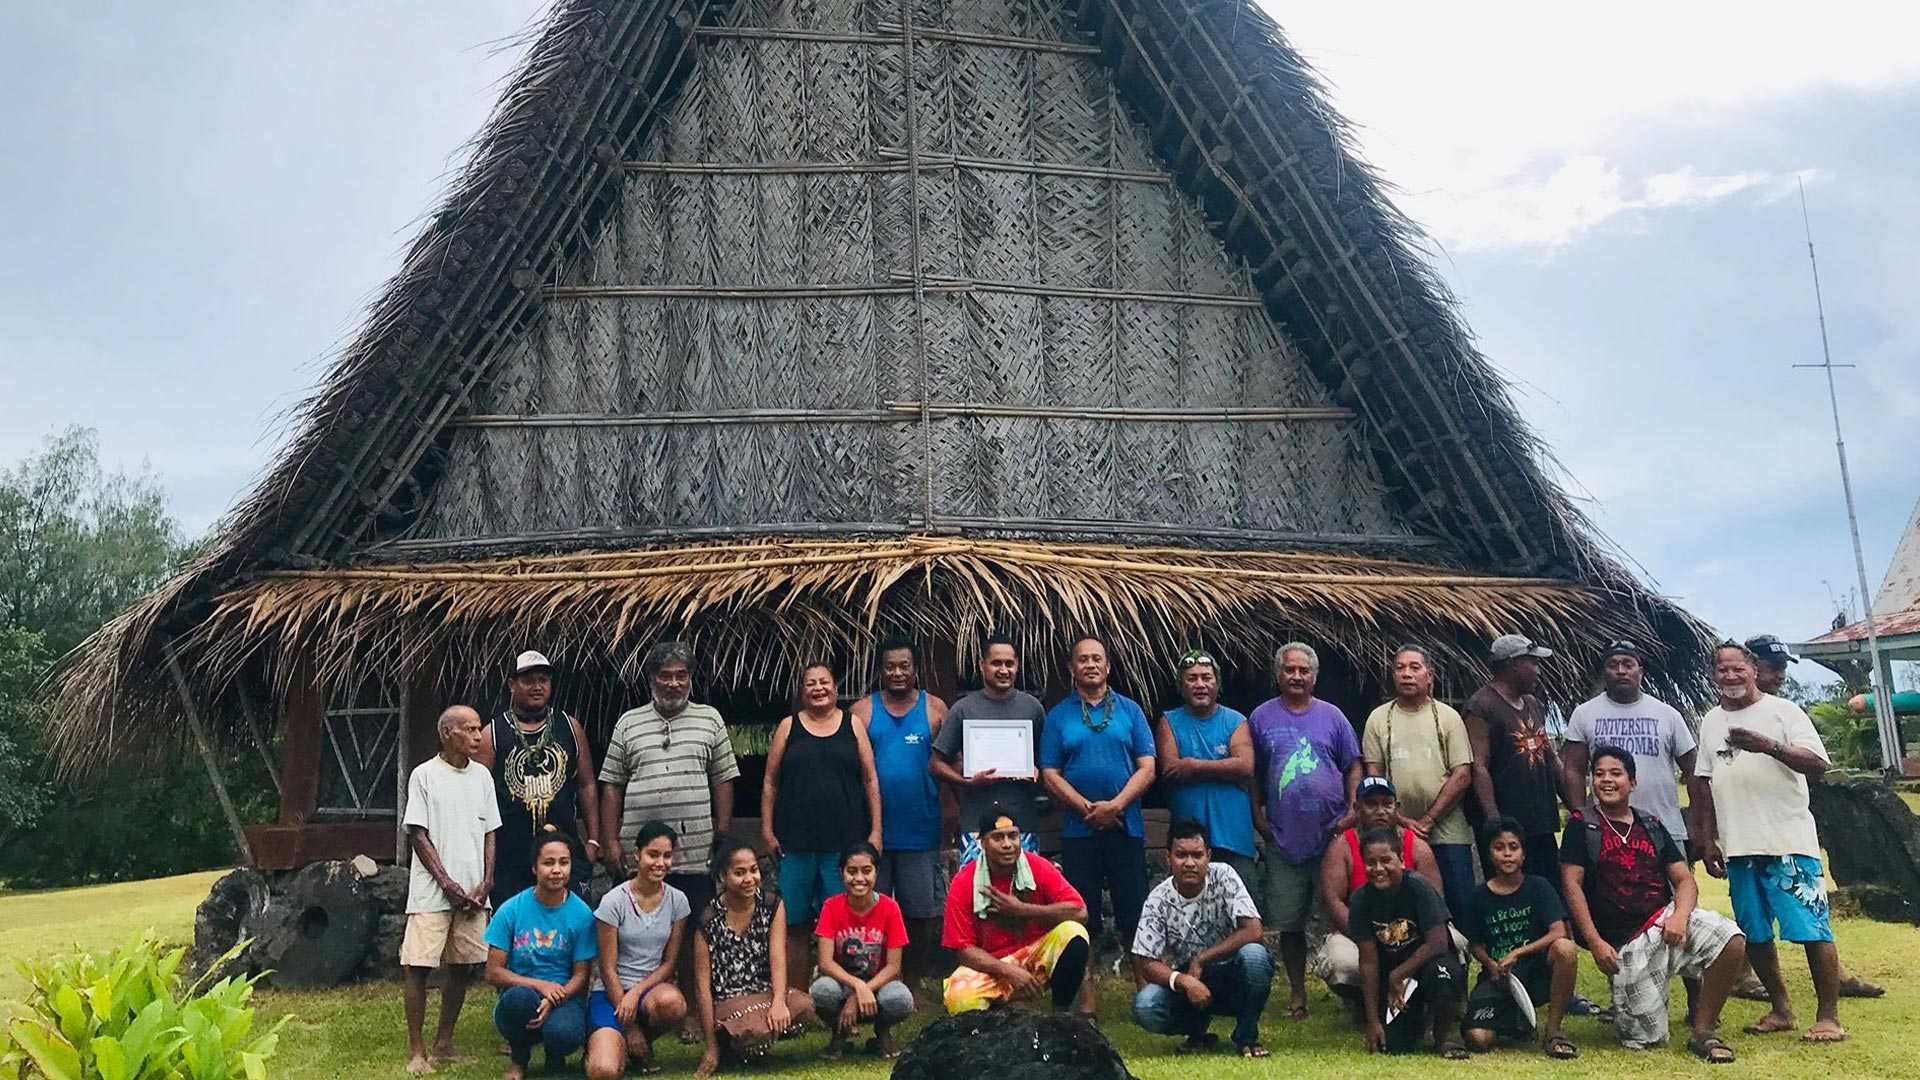 A group photograph of people from Micronesia standing in front of a hut